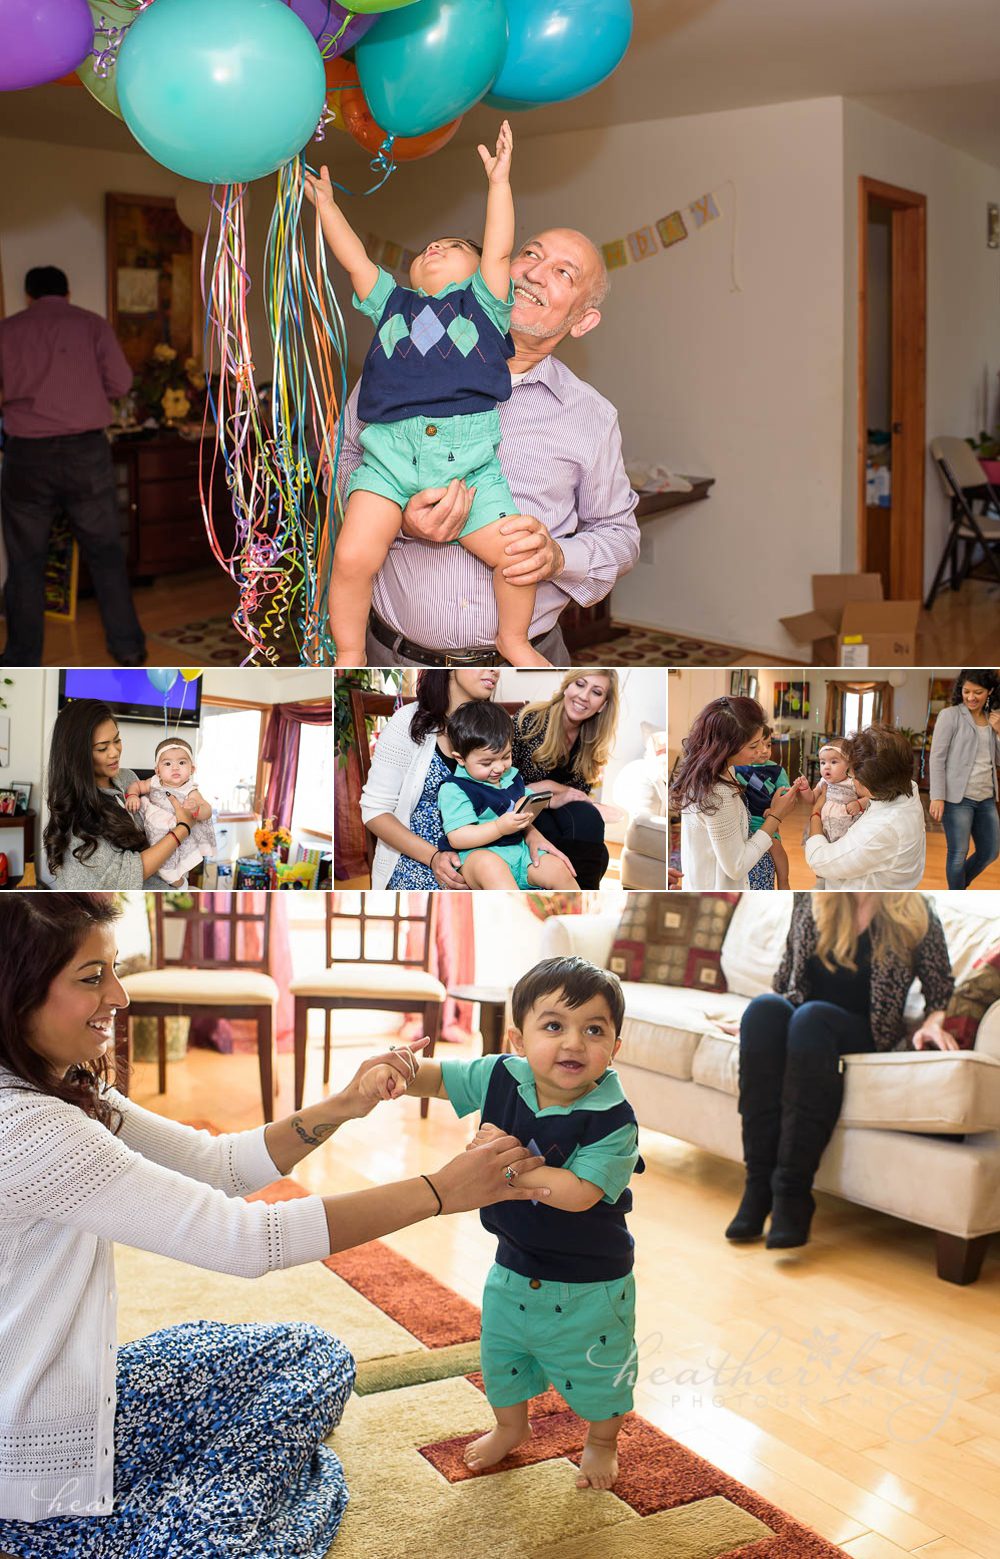 1st birthday party photo of guests and birthday boy. Danbury ct photographer Heather Kelly Photography